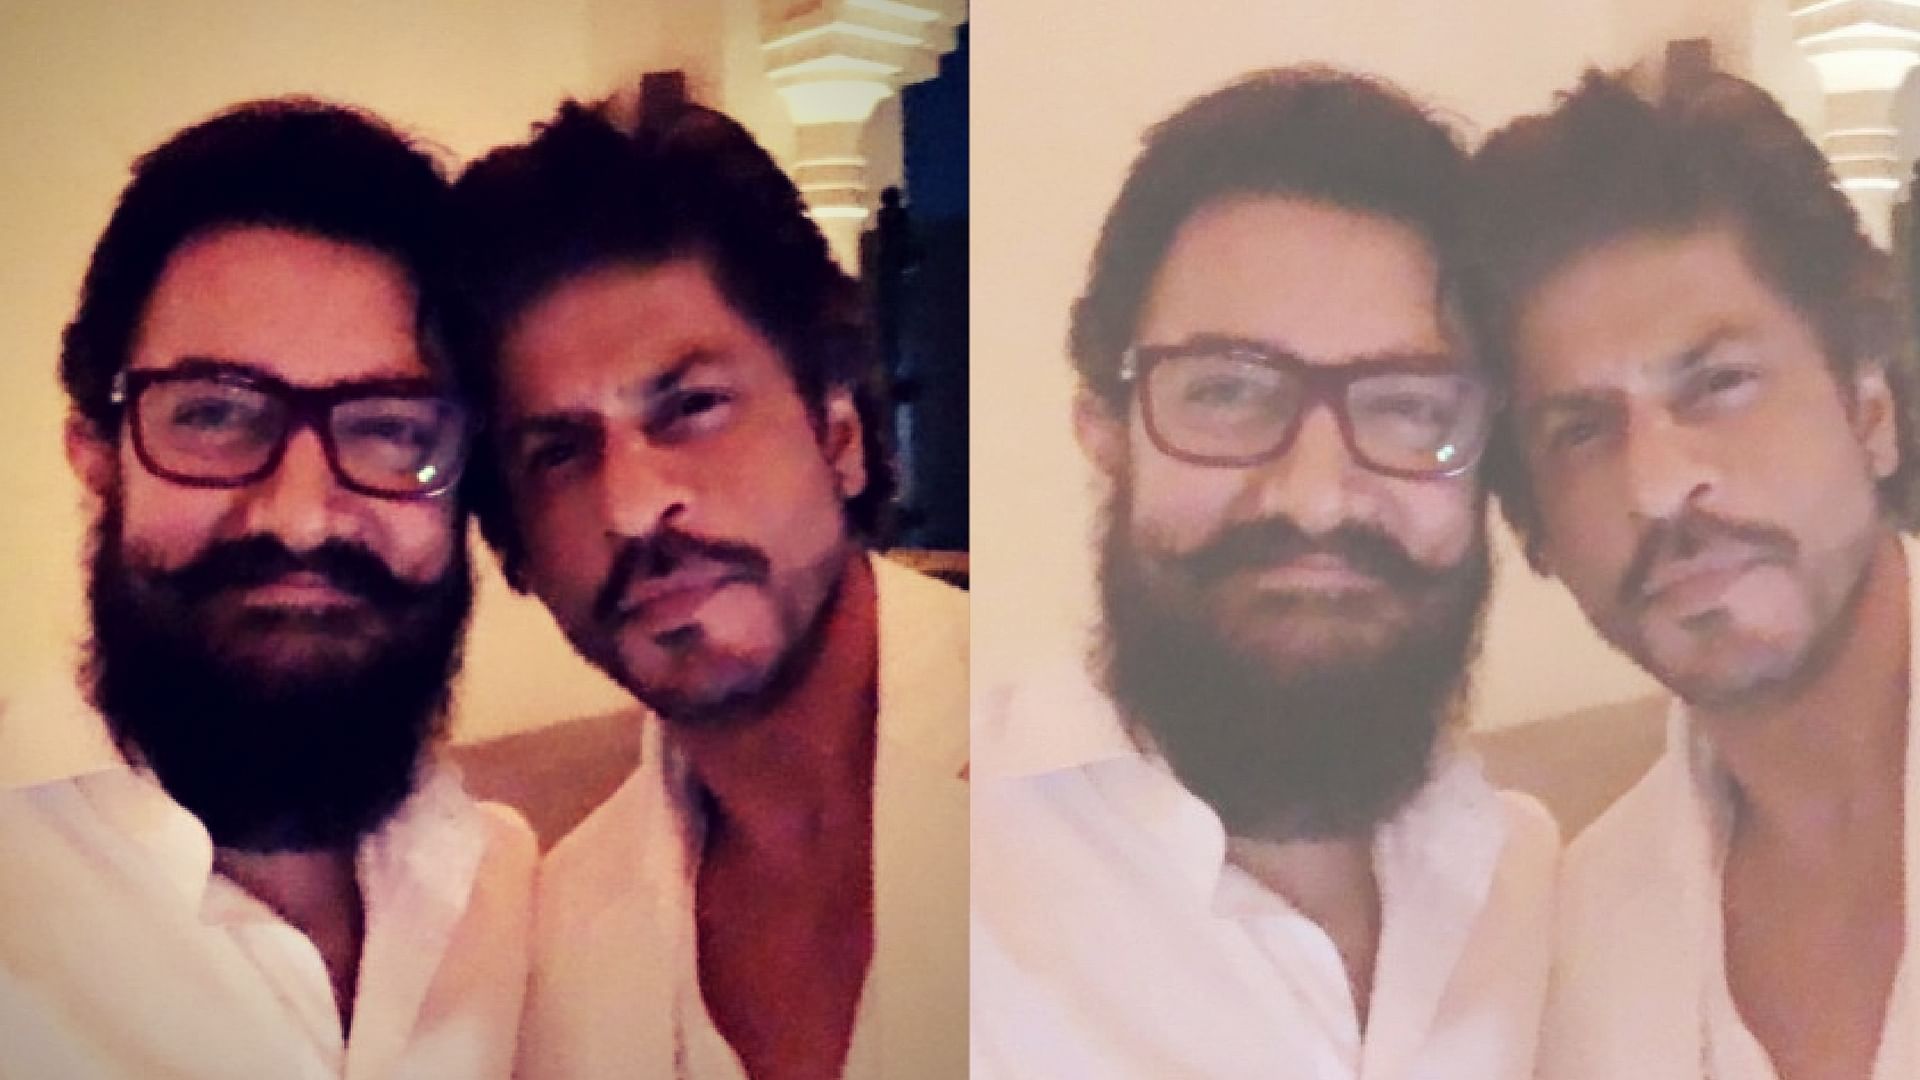 

This is the first picture of Aamir and Shah Rukh Khan by themselves. (<a href="https://twitter.com/iamsrk/status/830139019640070145">Photo courtesy: Twitter/ @iamsrk</a>)